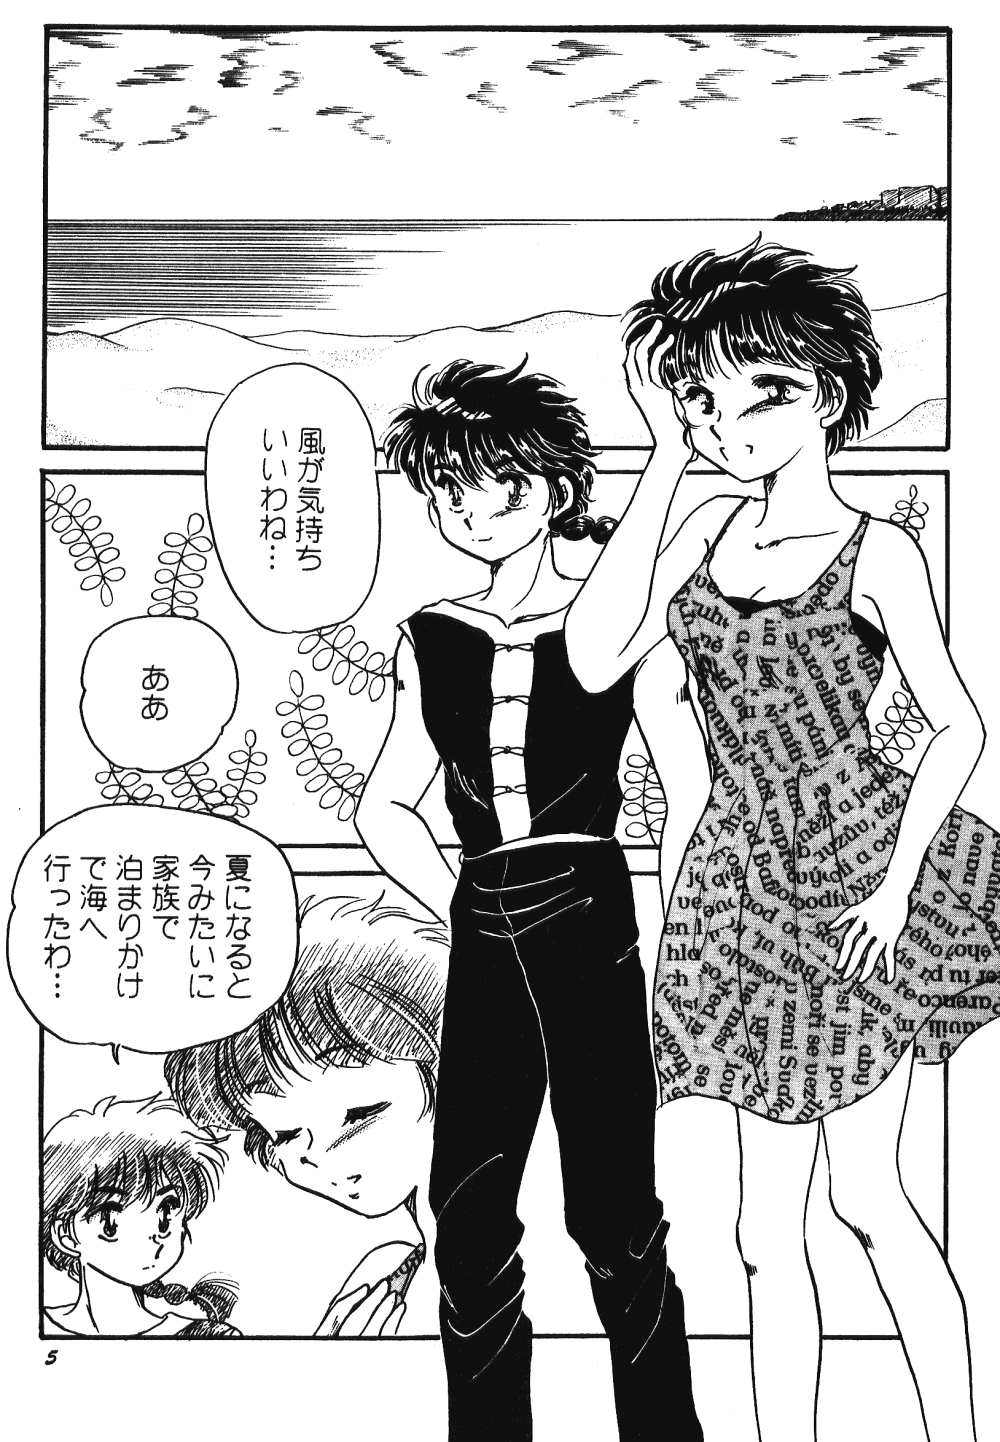 Never Forget Summer (Ranma 1/2) 3